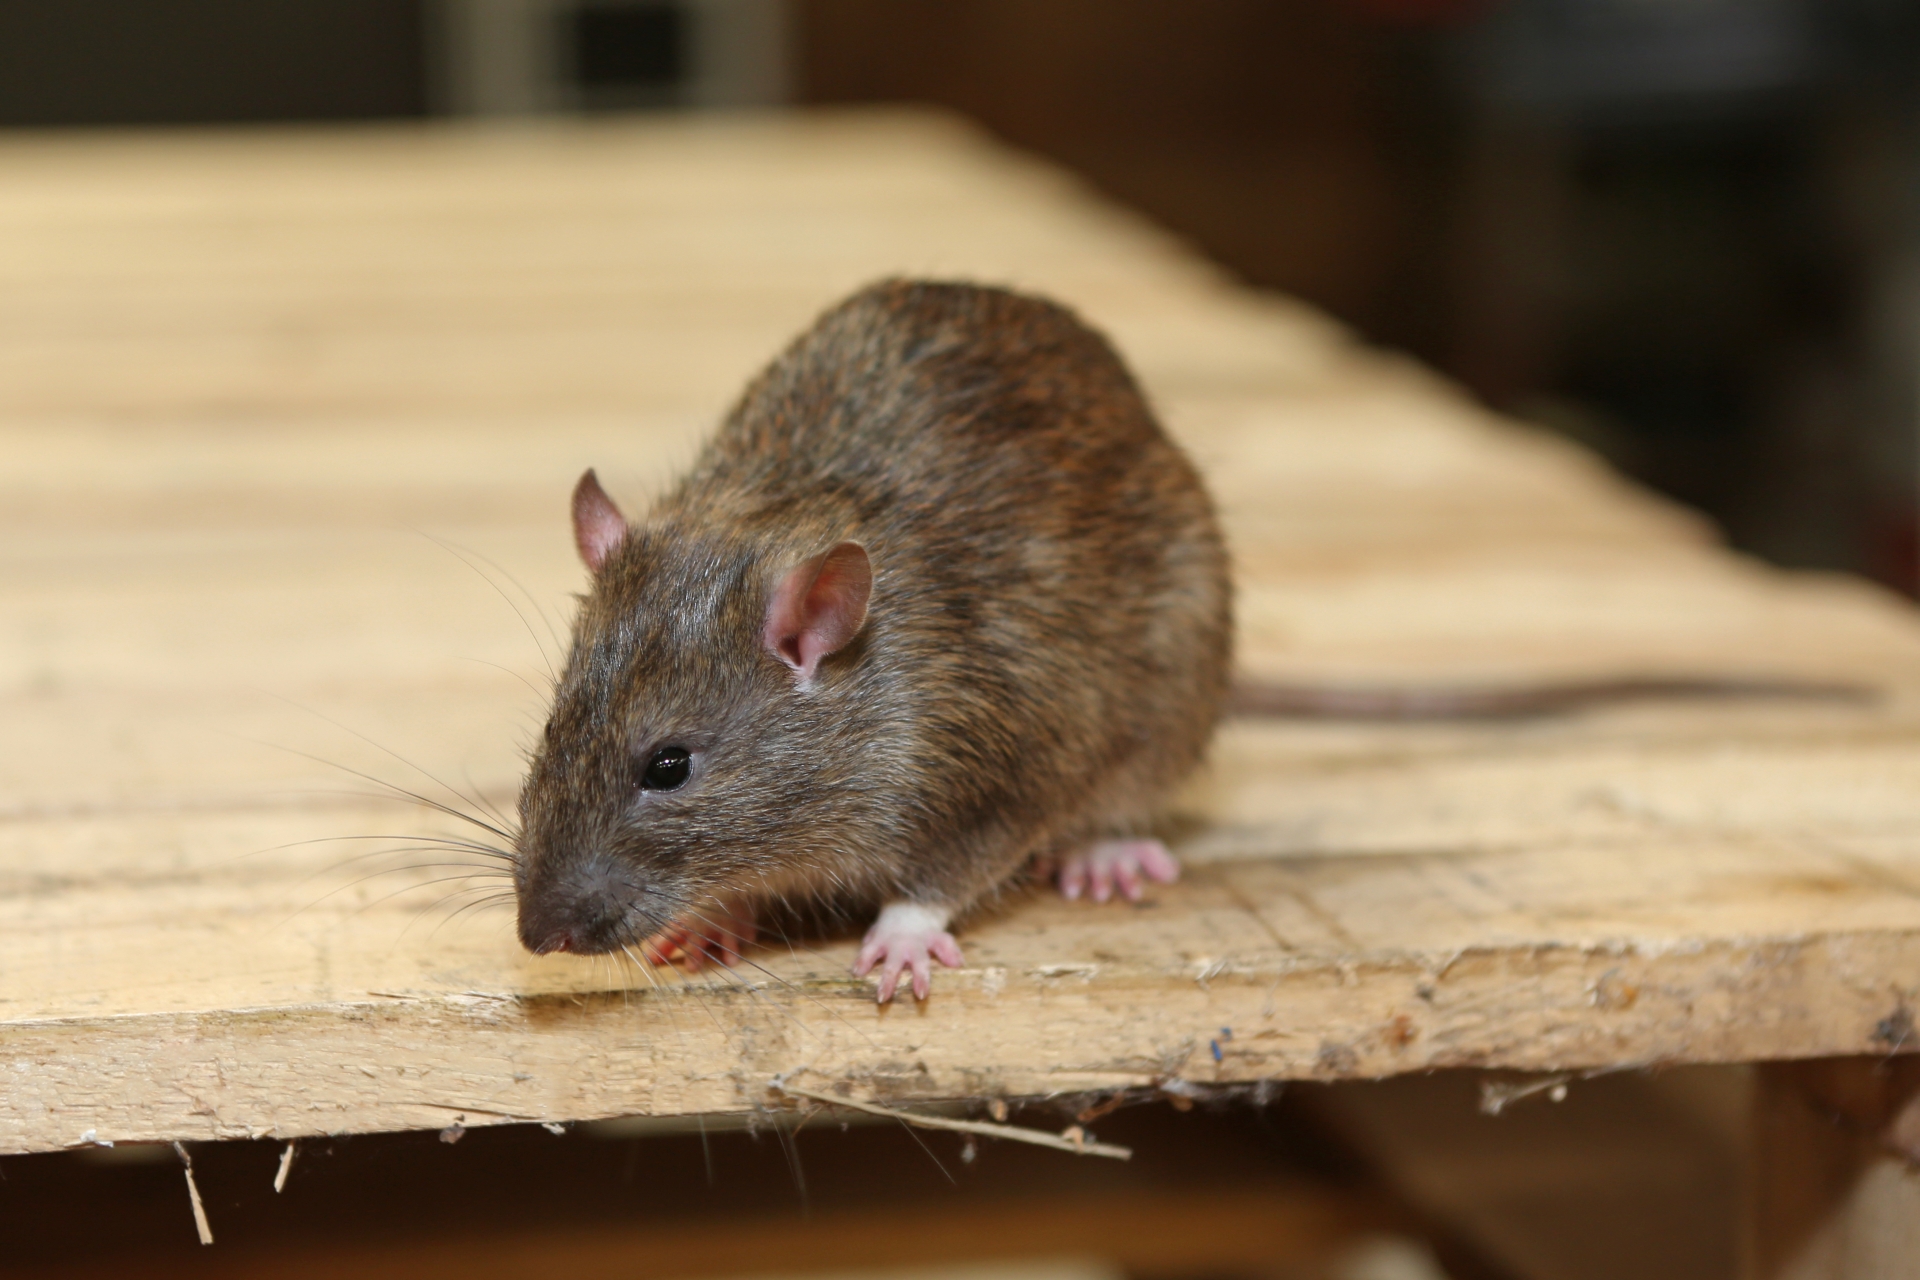 Rat Infestation, Pest Control in Abbots Langley, Bedmond, WD5. Call Now 020 8166 9746